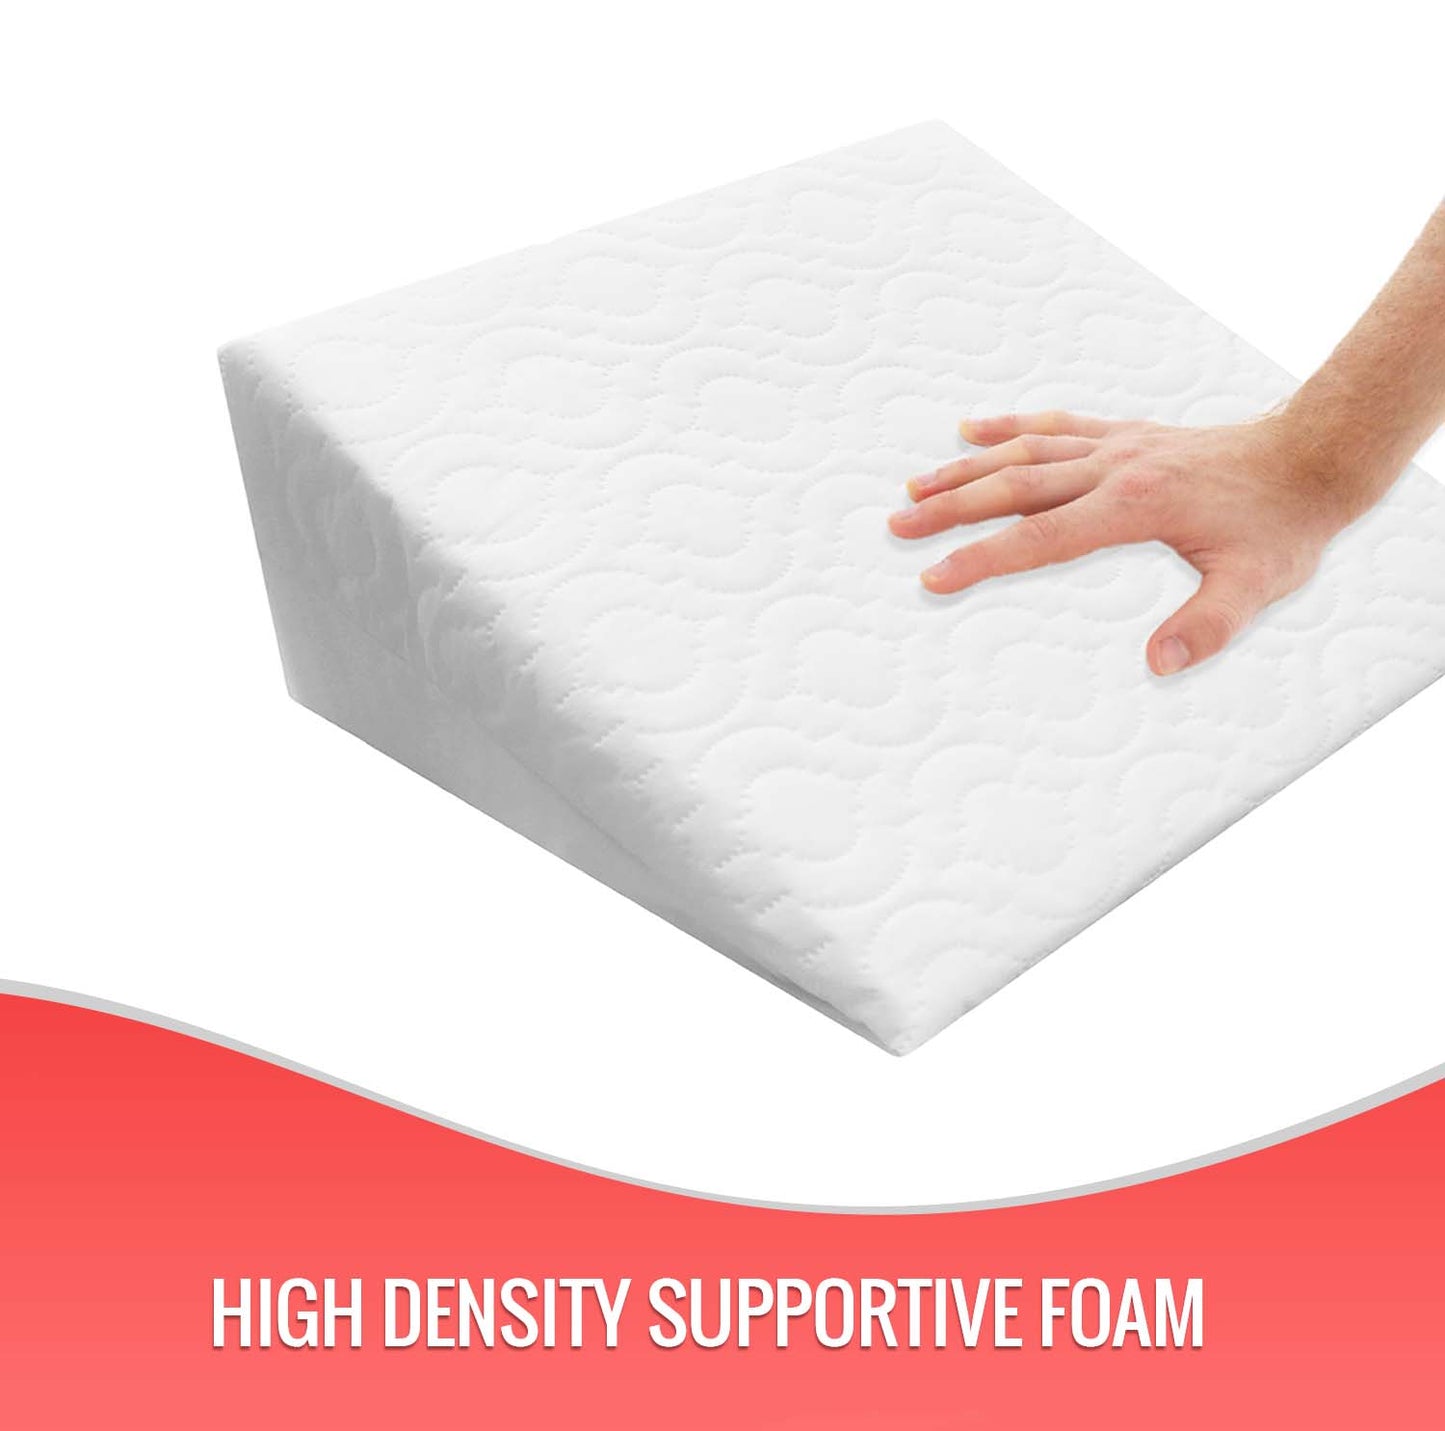 Reclining Orthopedic Hybrid Foam Wedge Pillow for Greater Comfort with Zip Cover